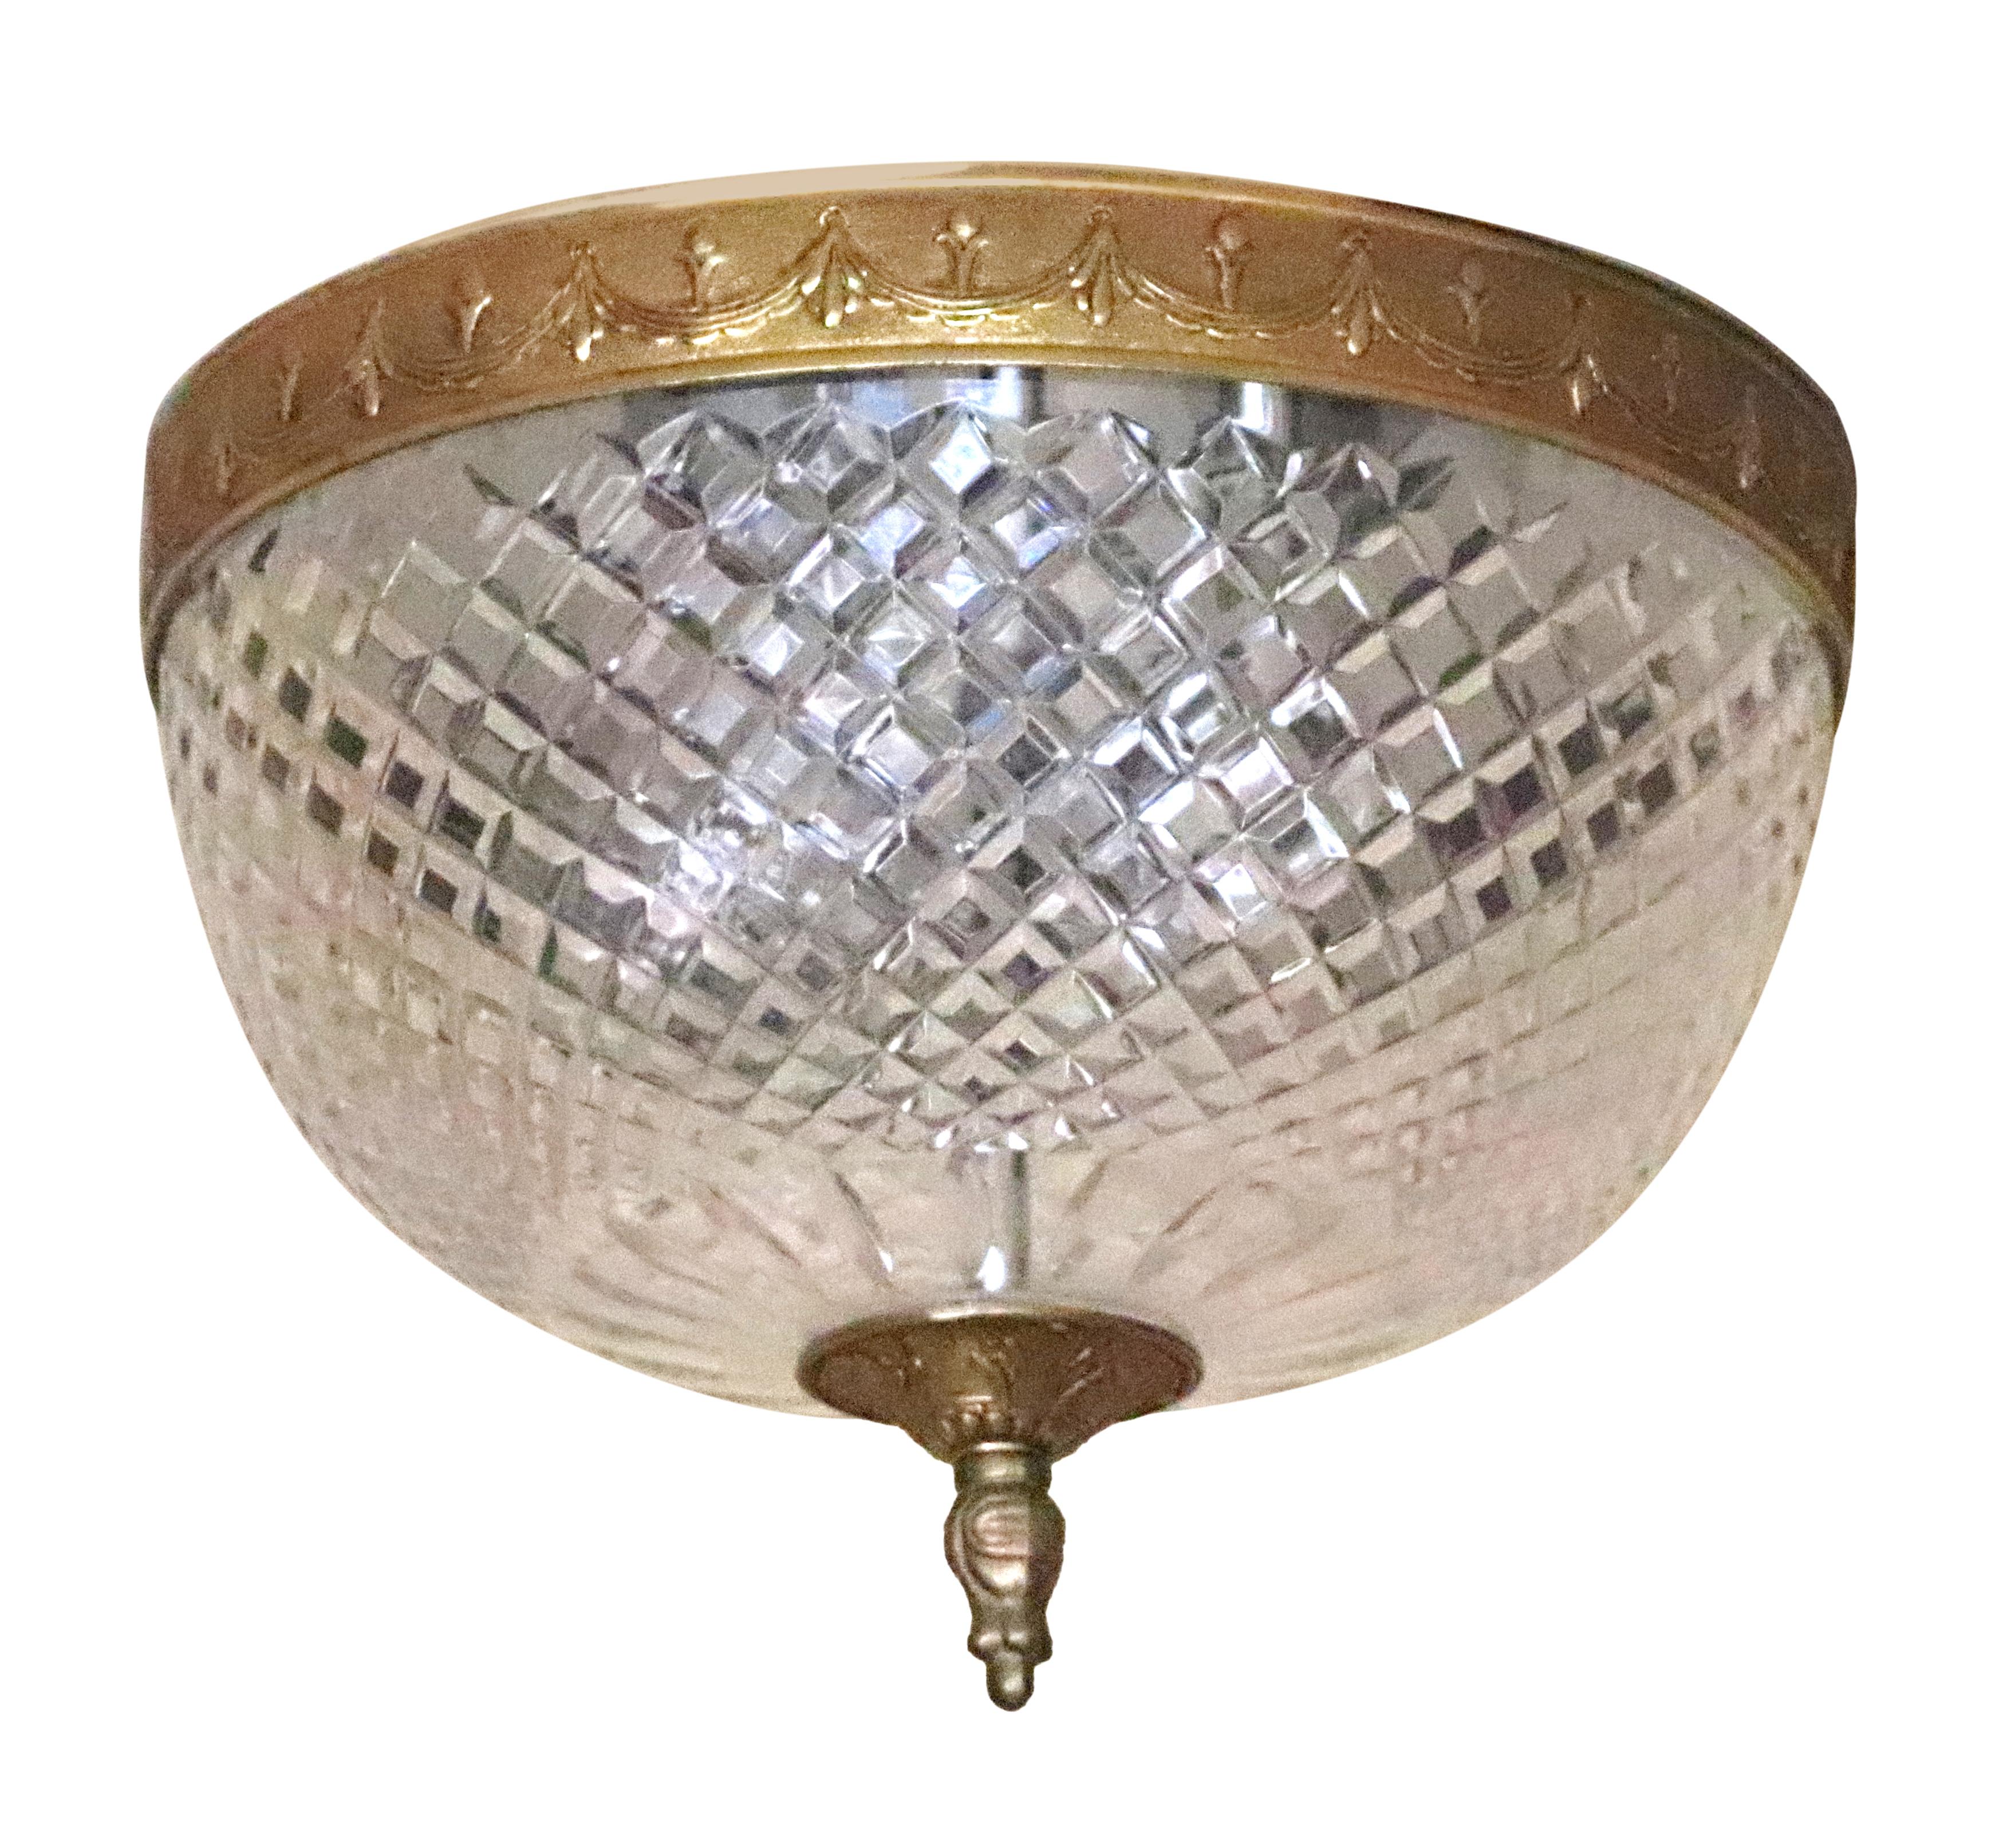 Waldorf Astoria Hotel Crystal Brass Flush Mount Light Qty Available NYC Park Ave 4